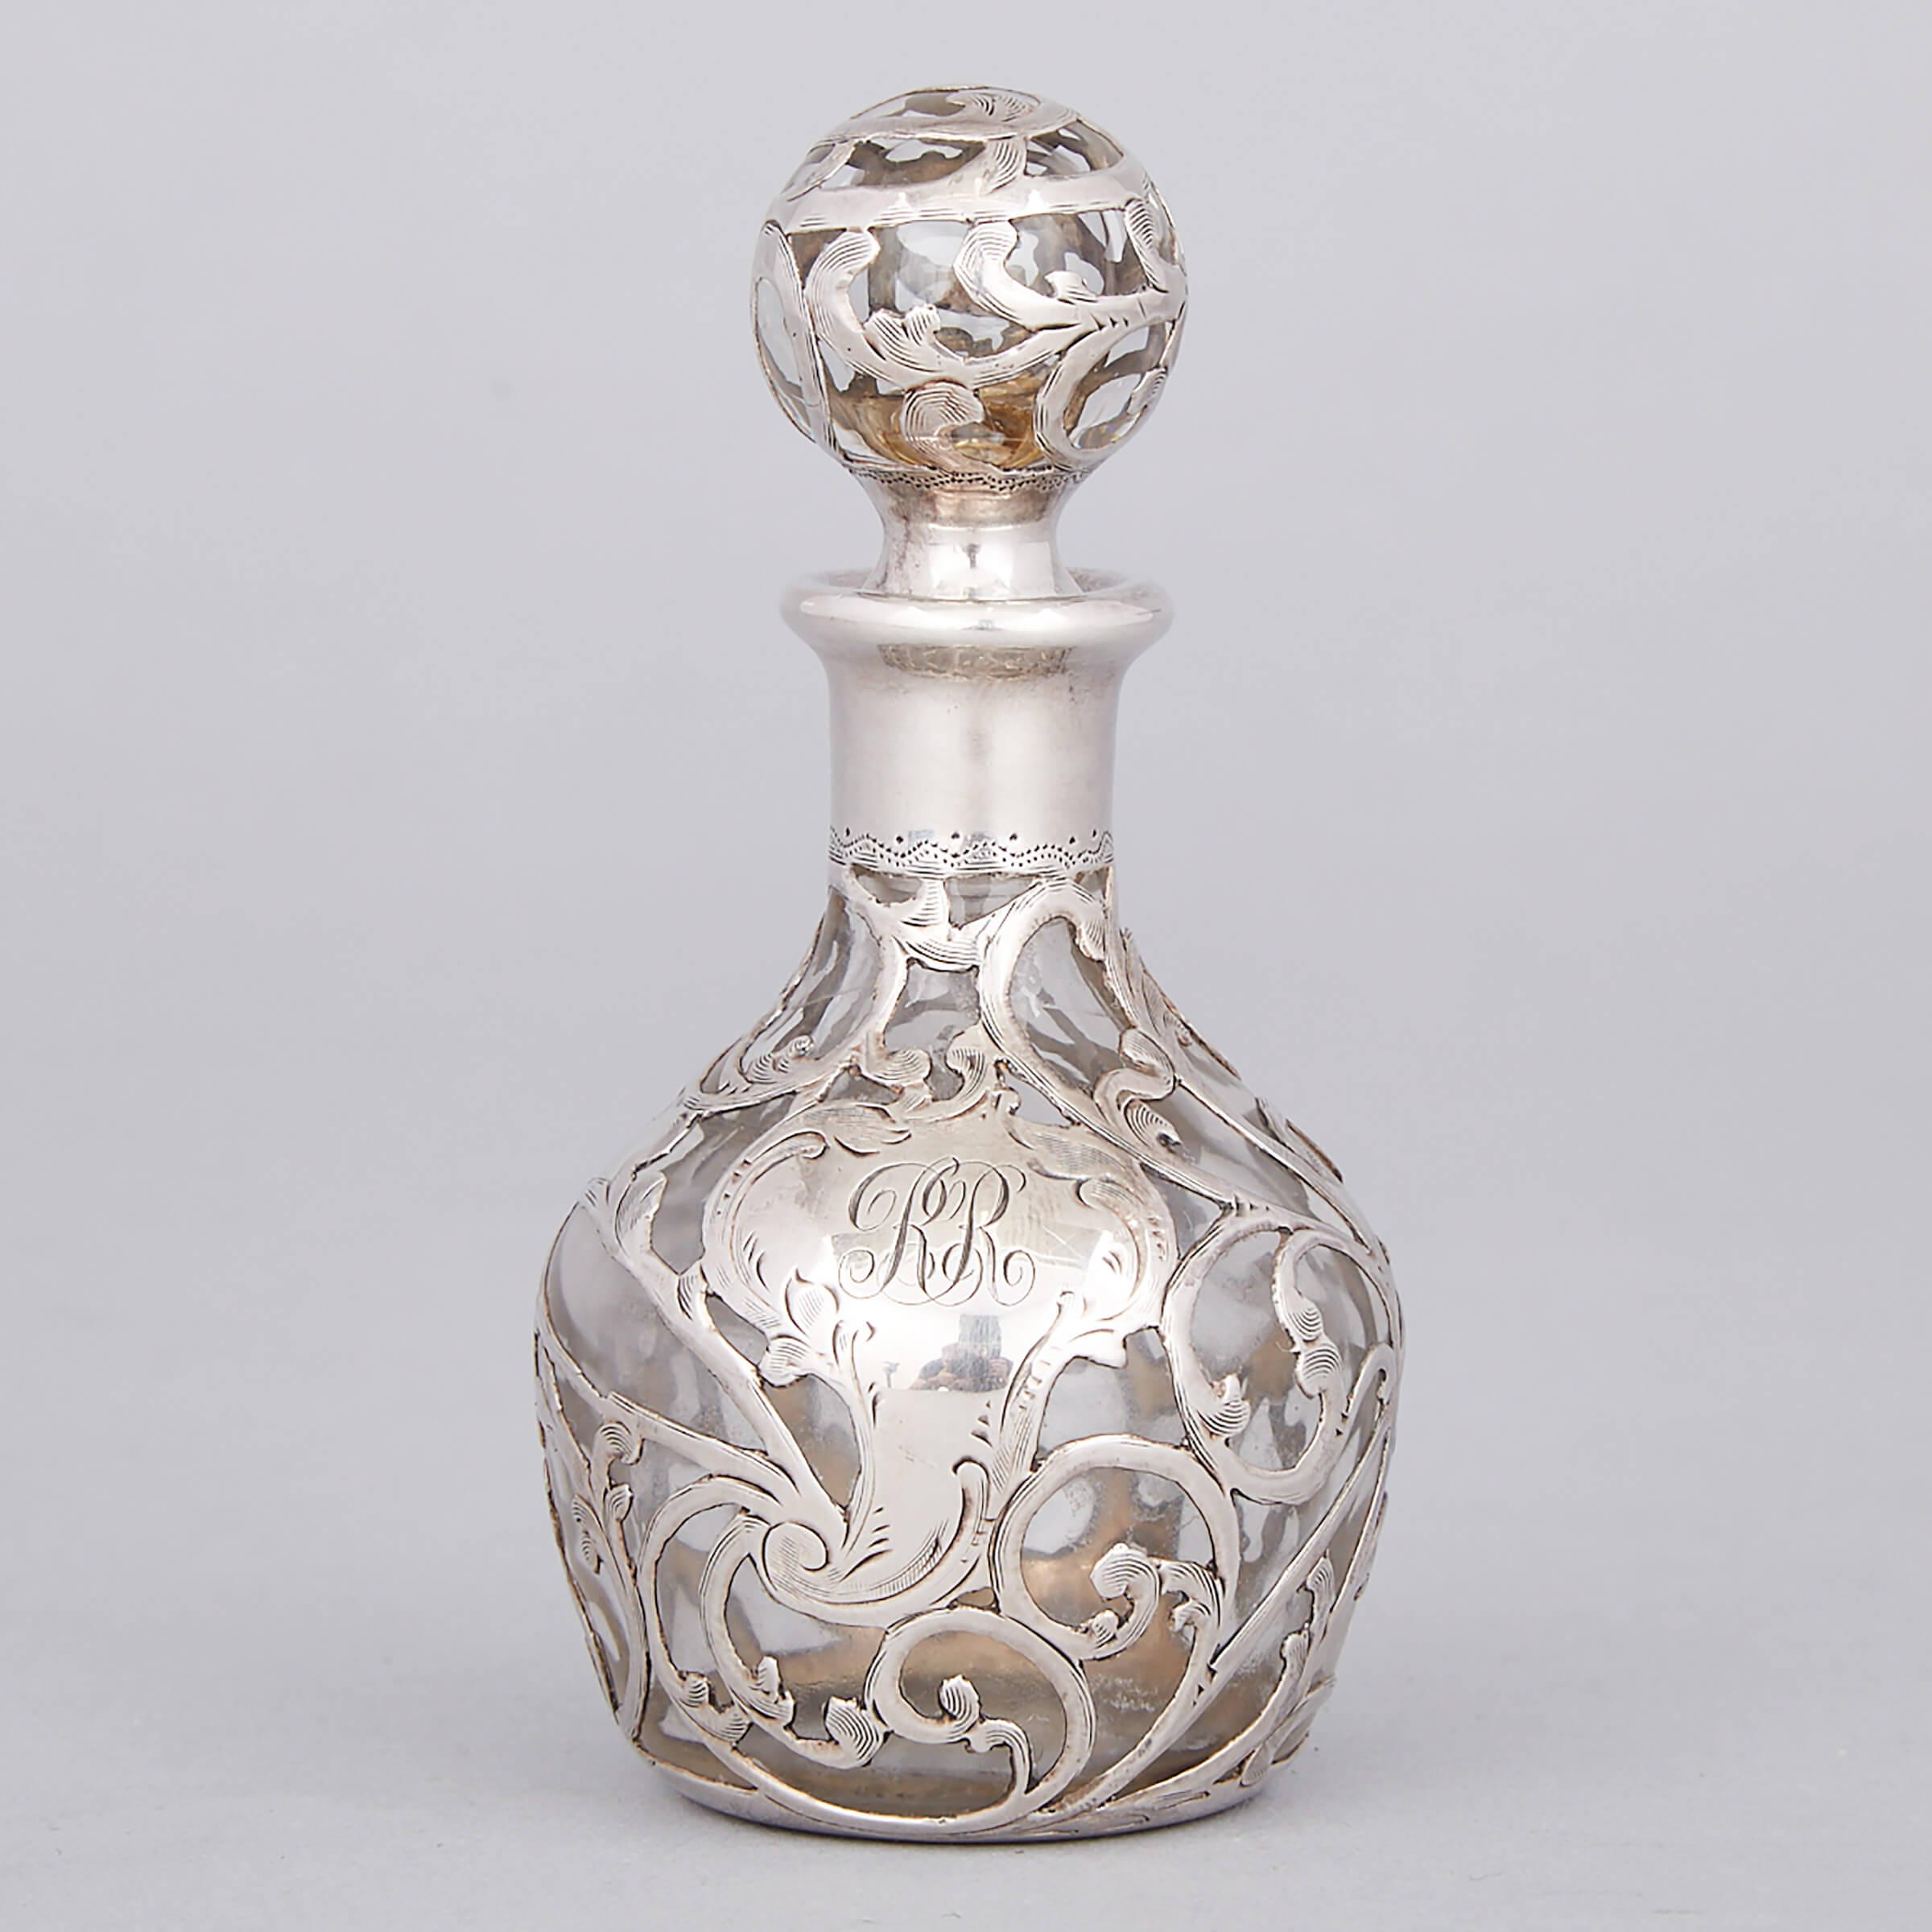 American Silver Overlaid Glass Perfume Bottle, late 19th century